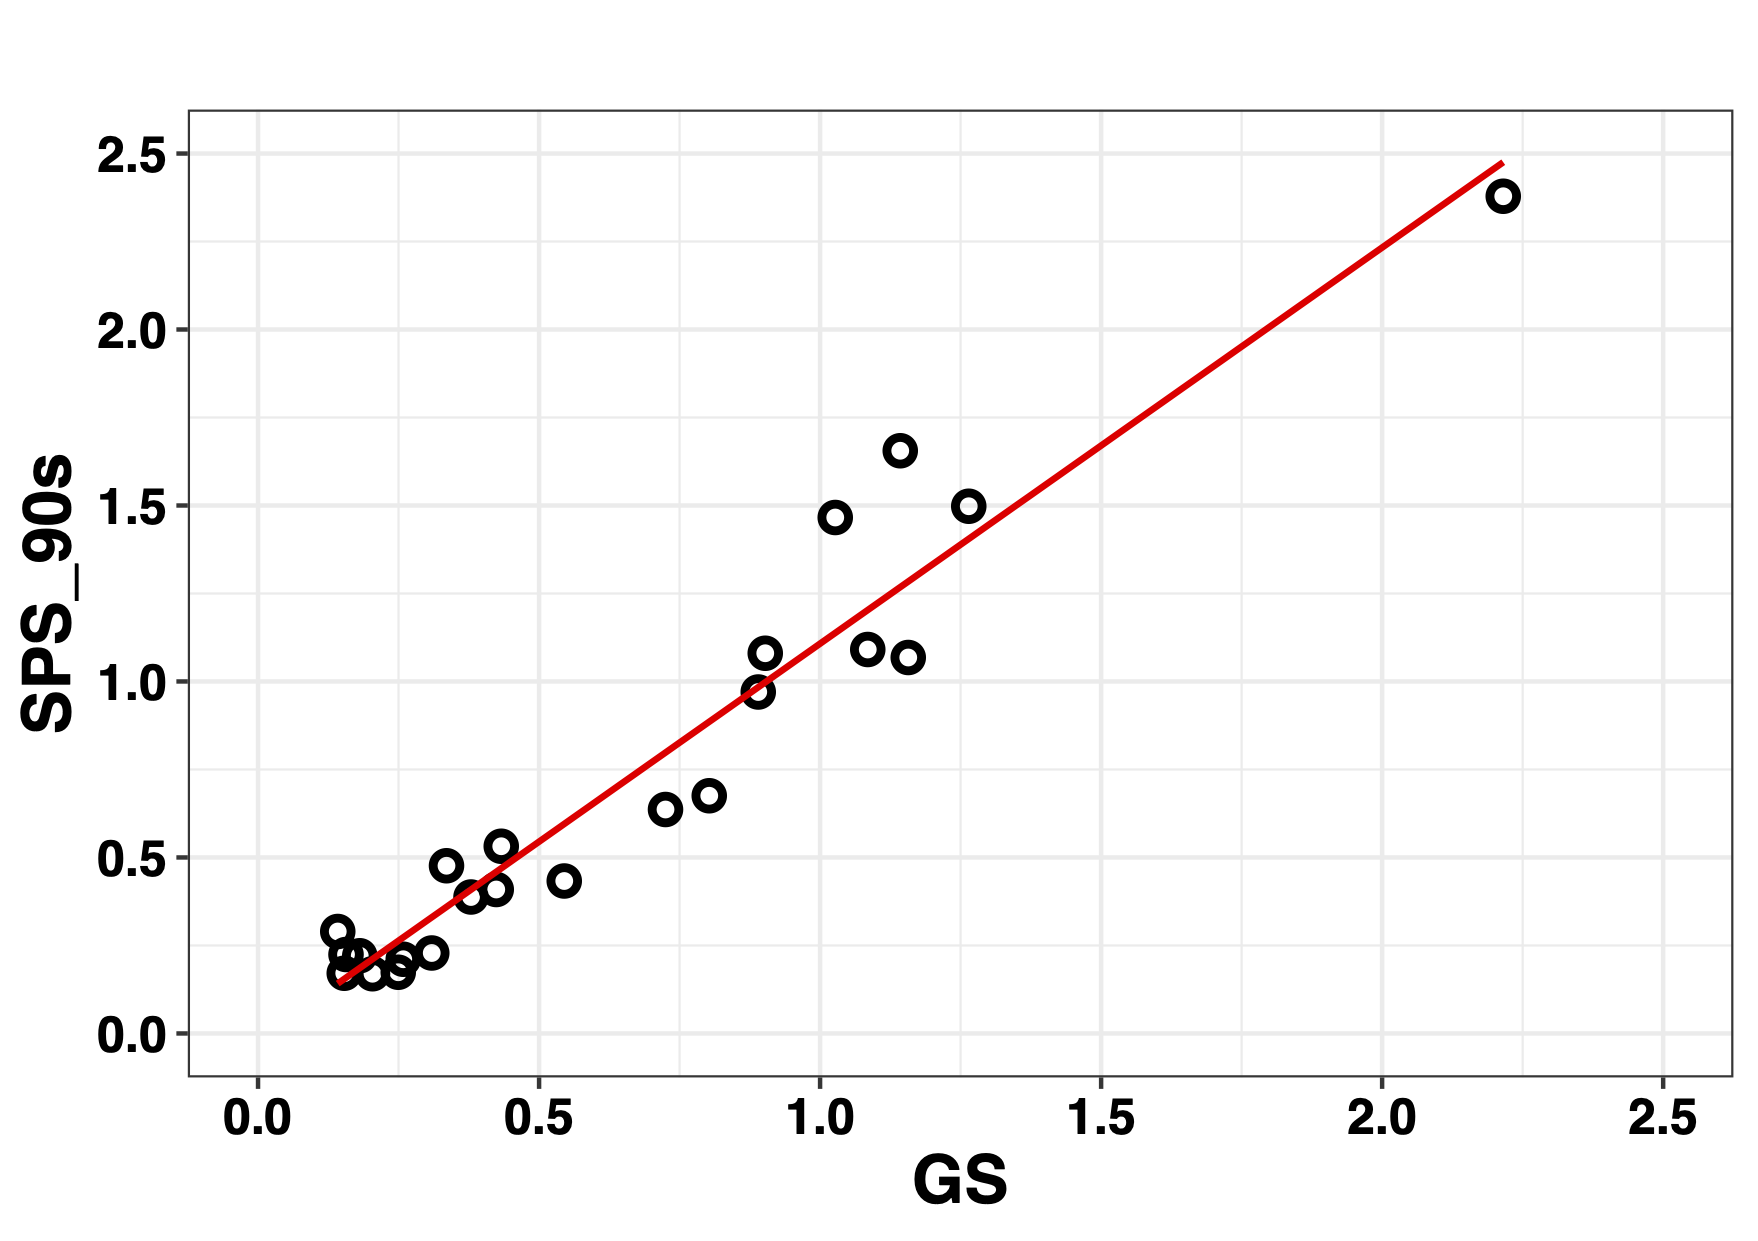 Correlation analysis of GS vs SPS 90 s of SPS index, rho = 0.93, p = 3.15e-06.